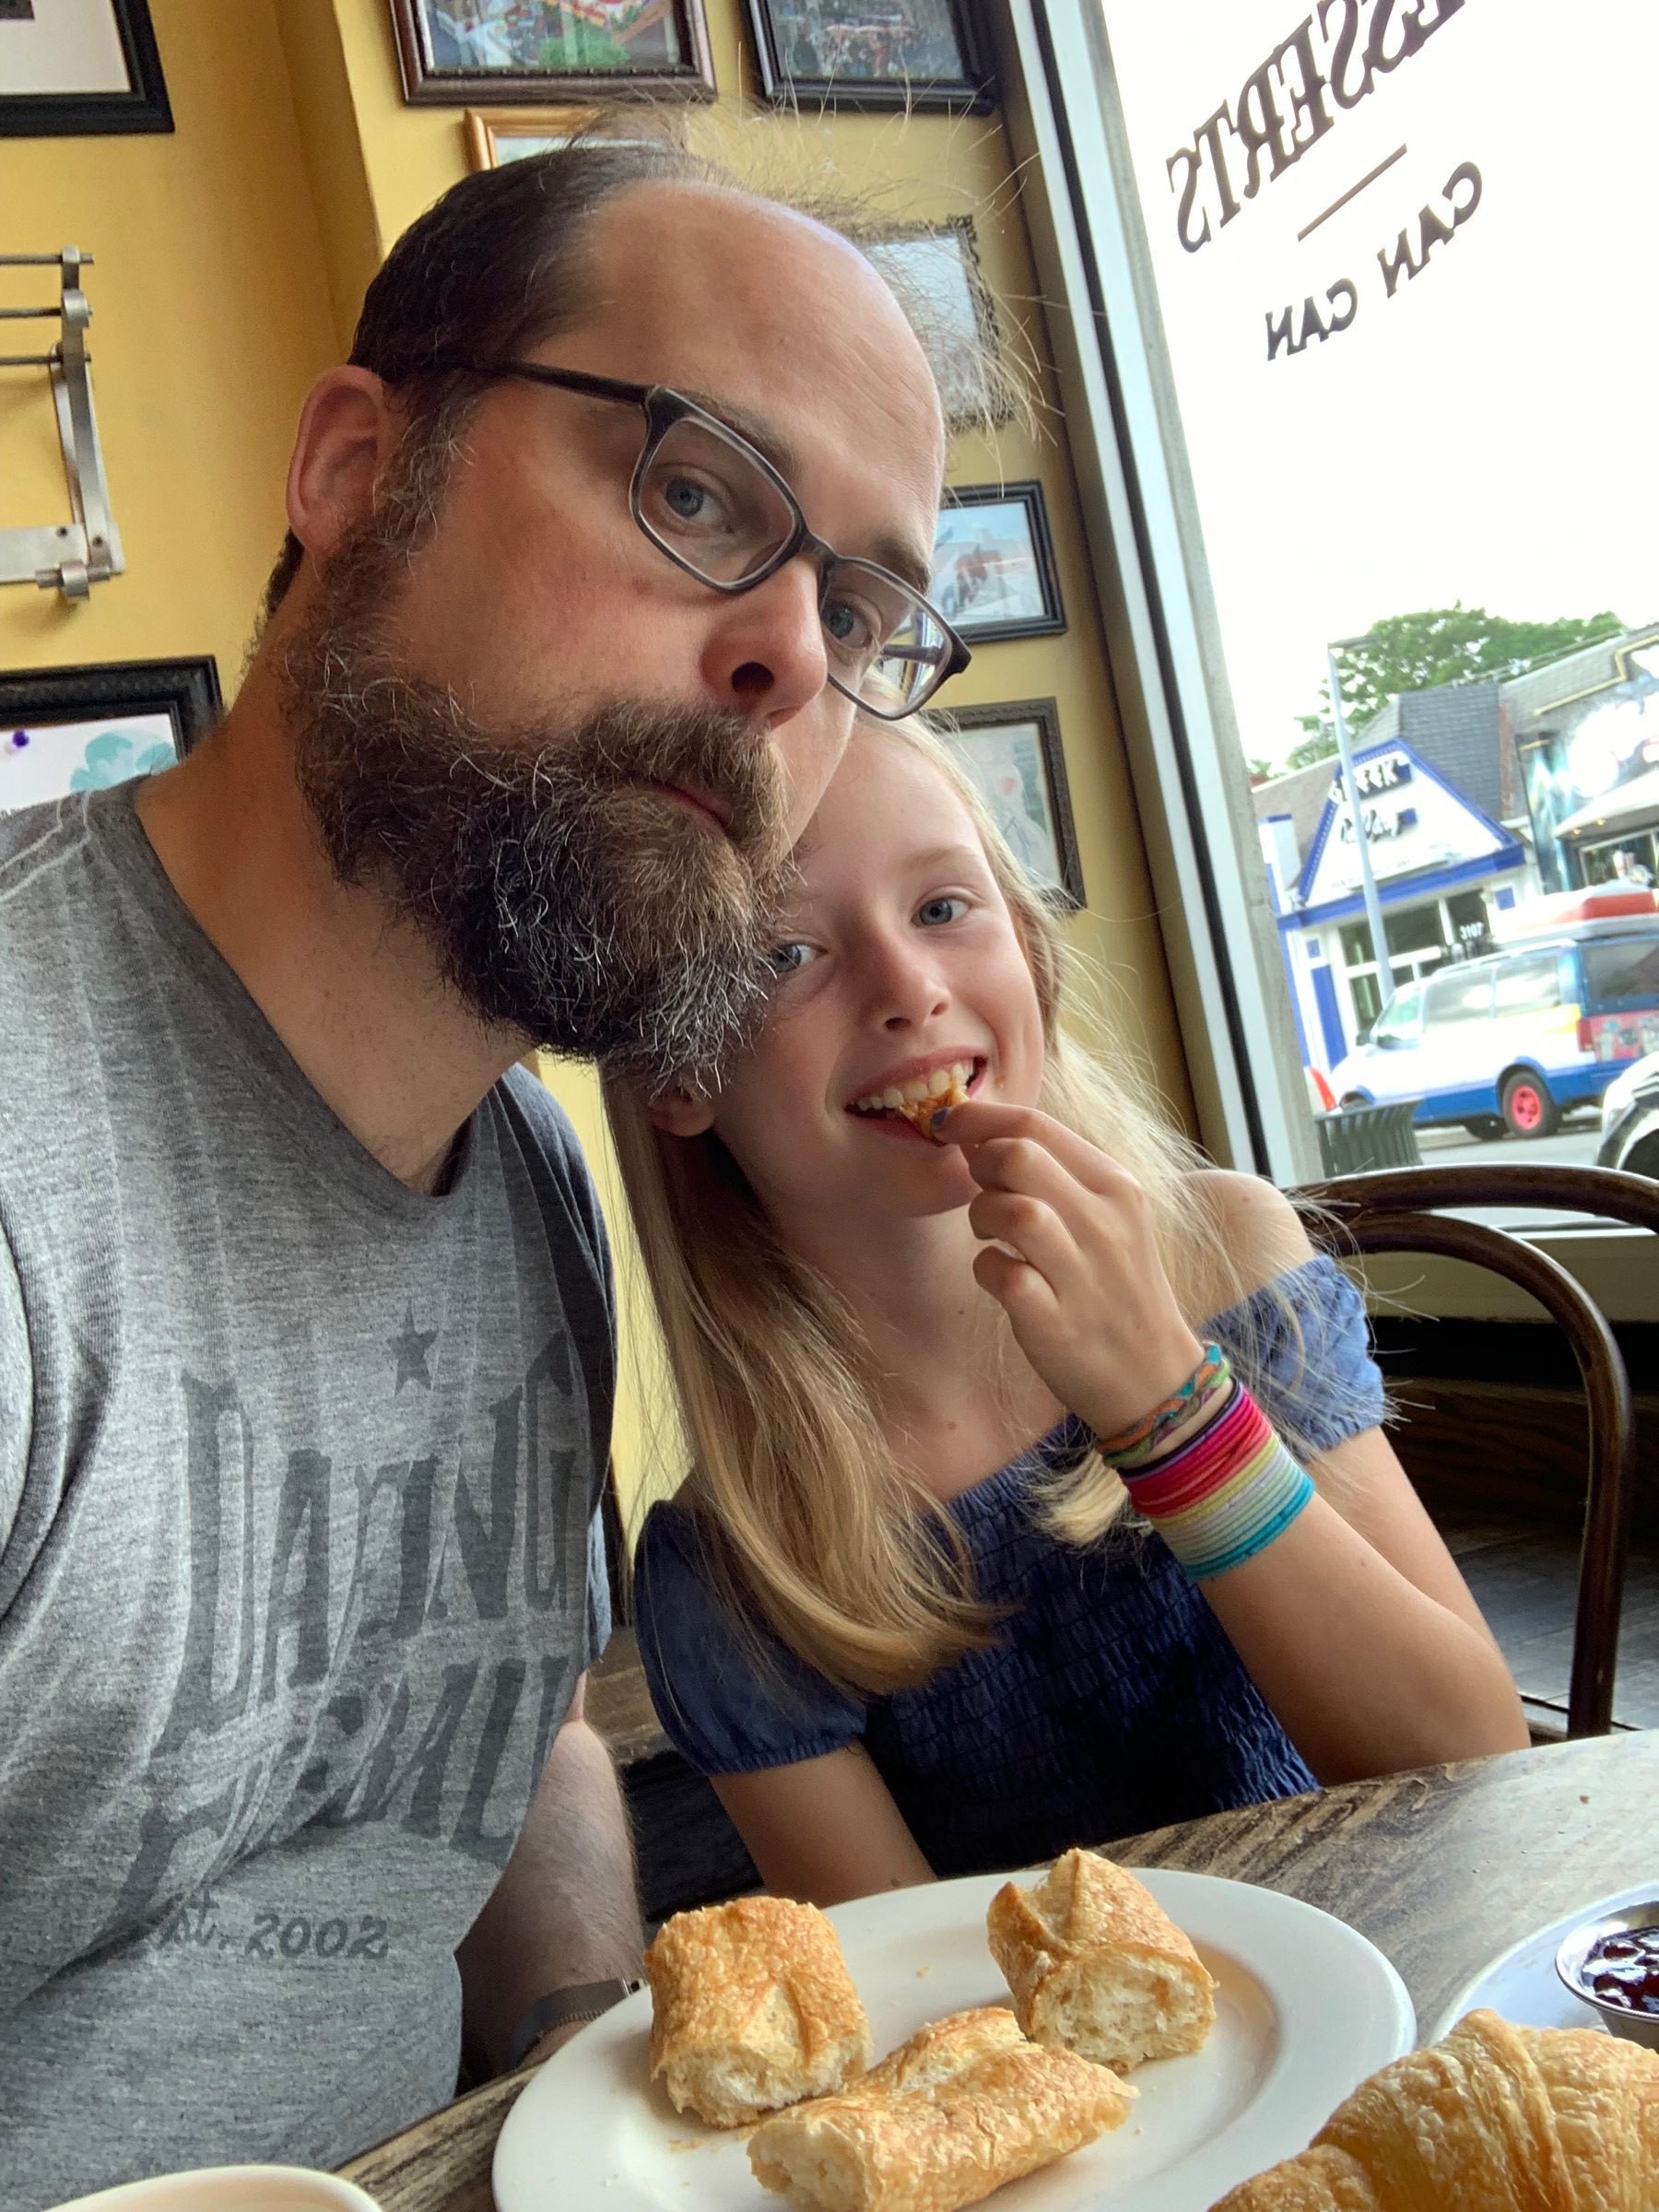 Sam and his youngest daughter take a selfie with pastries.